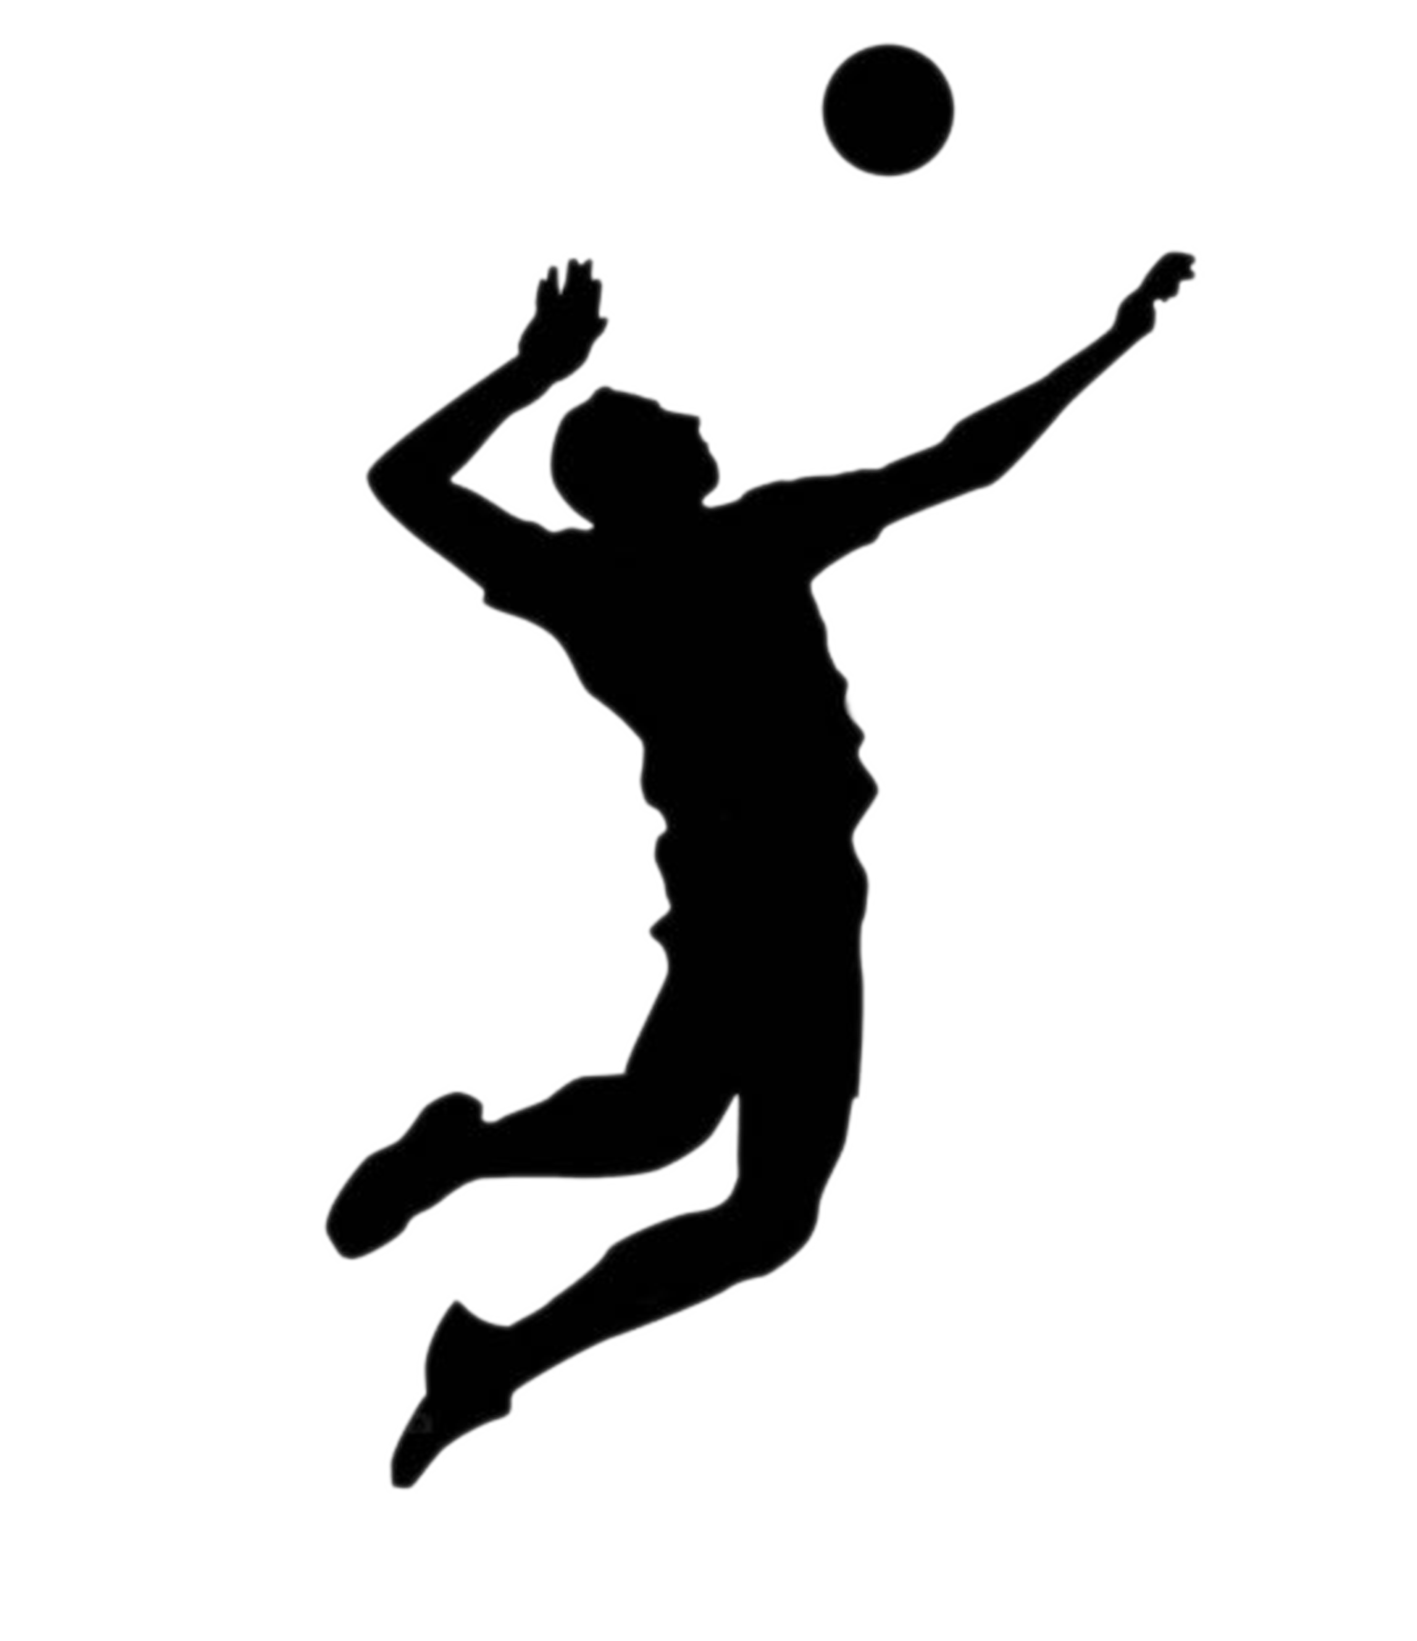 Vollyball images federation of. Volleyball clipart shape